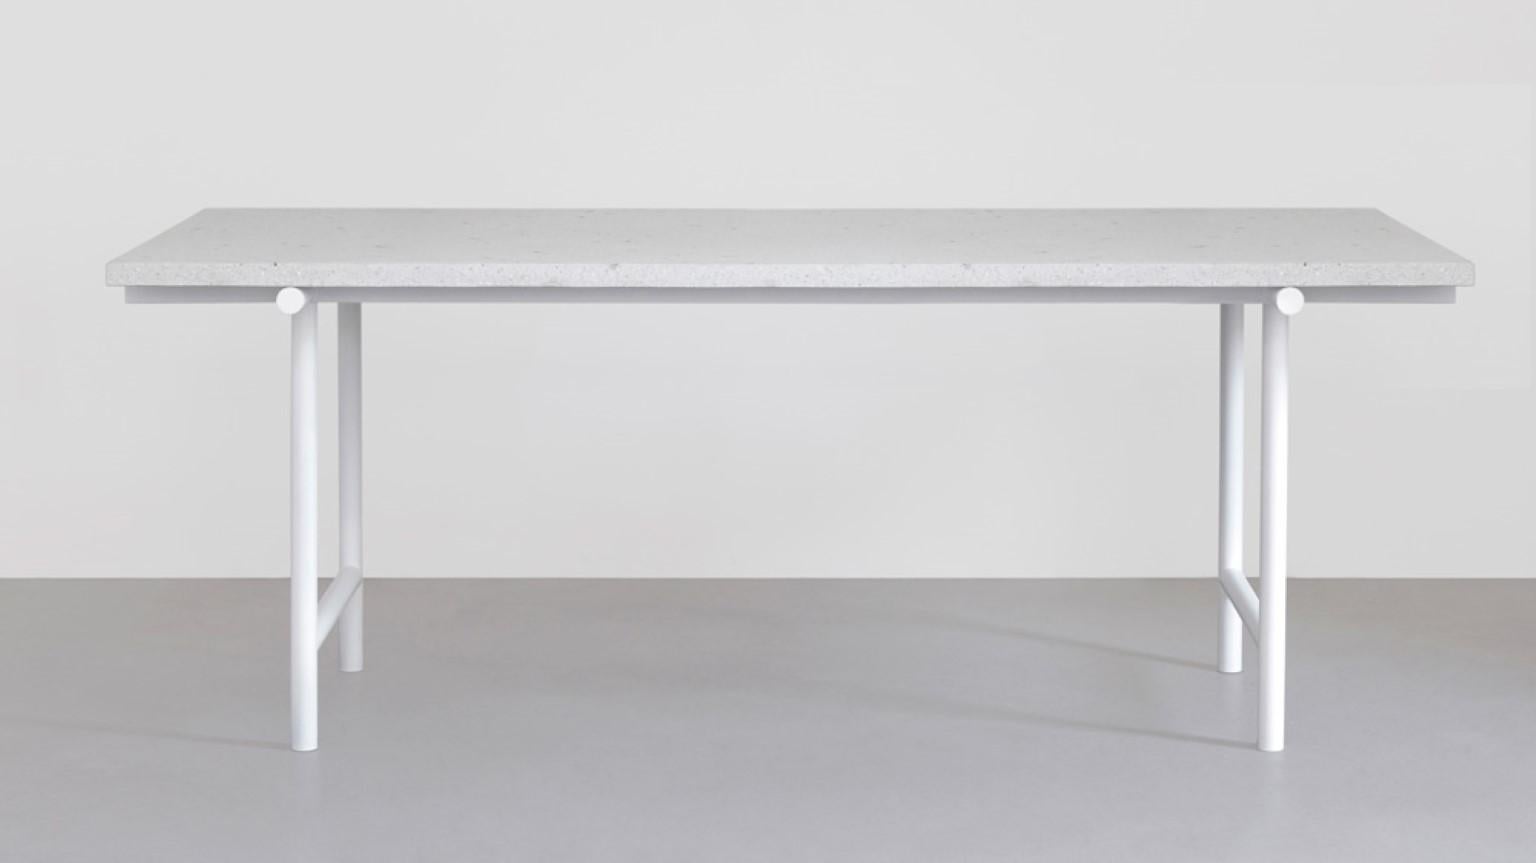 Terrazo Bobby table by Llot Llov
Dimensions: W 100 x D 40 x H 32 cm
Materials: Nail Polish Terrazzo


The dining table BOB’s table top is made of GLACIER nail-polish terrazzo, the table base structure consists of a powder-coated steel